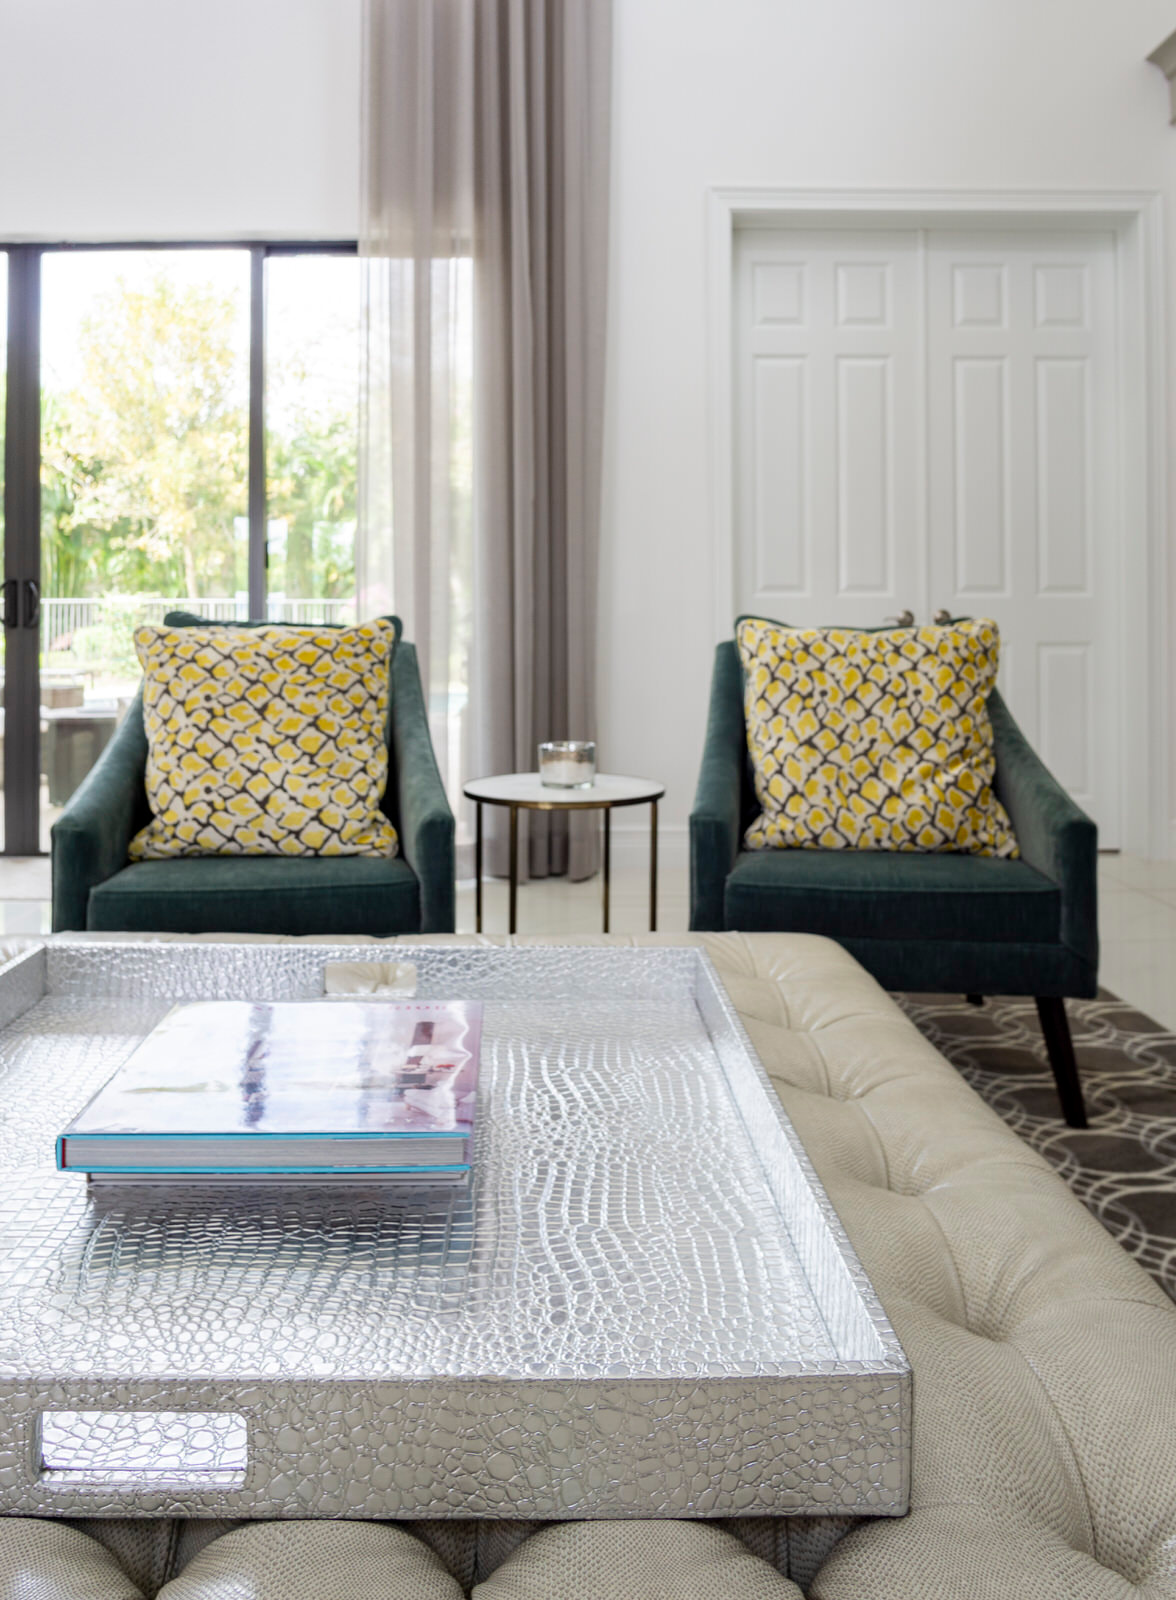 green chairs with yellow pillows pop on neutral backdrop